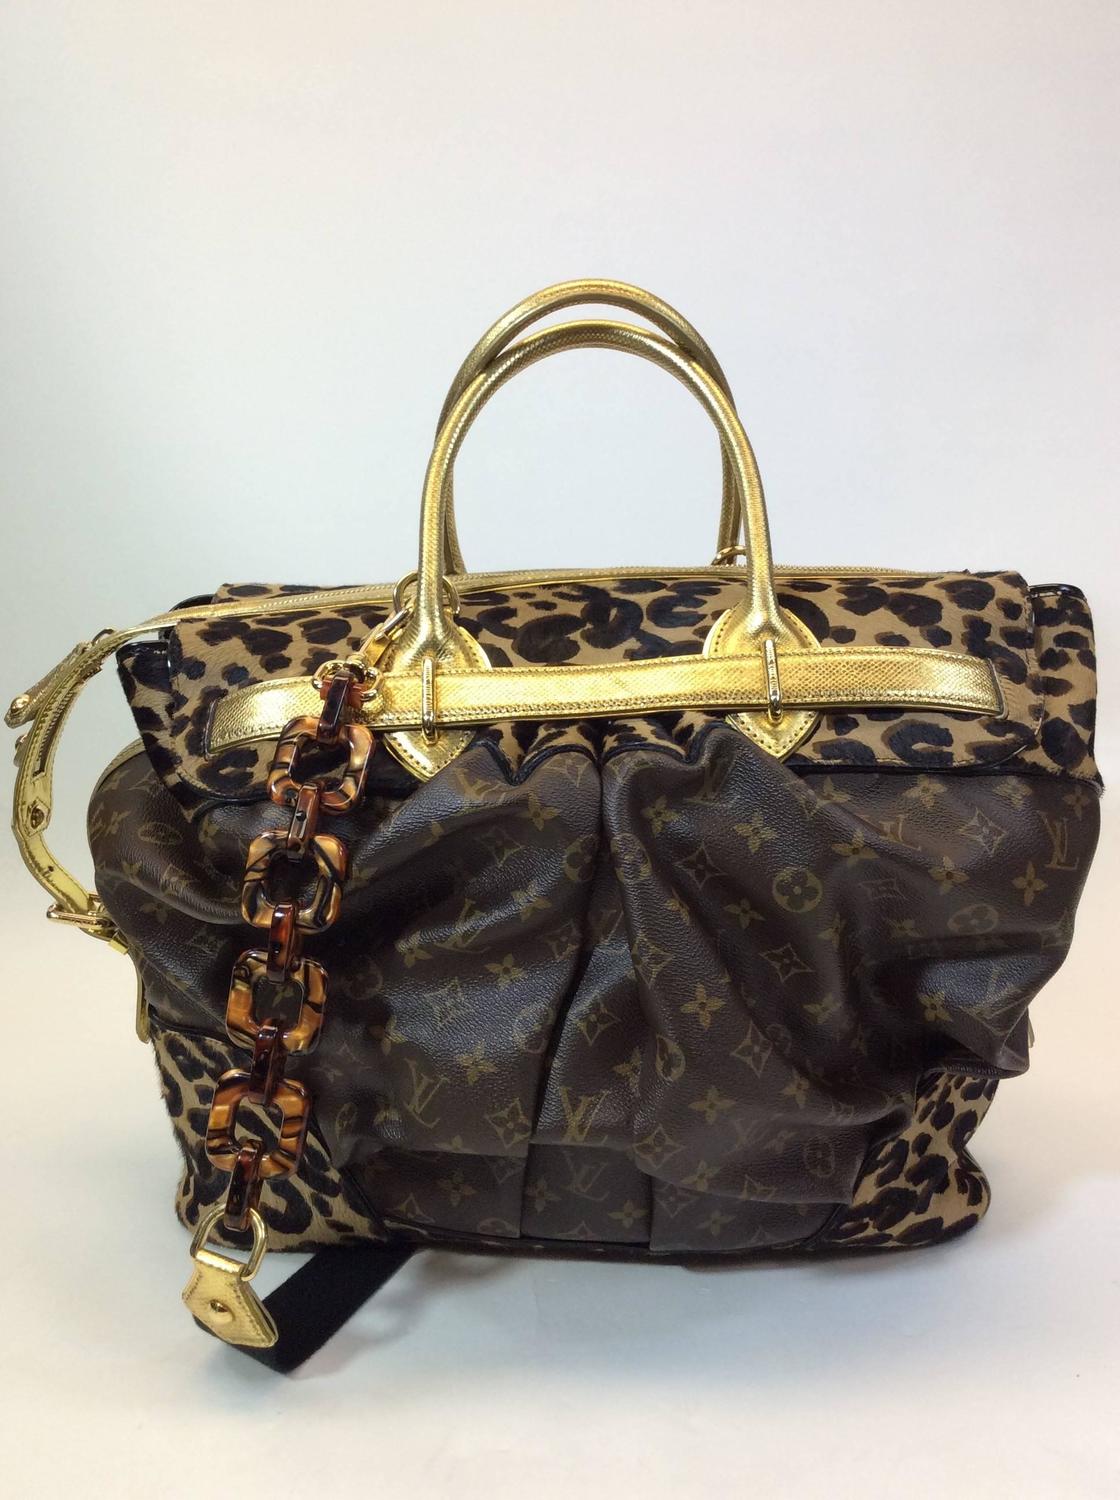 Louis Vuitton Exclusive Monogrammed Leopard Steamer Bag For Sale at 1stdibs